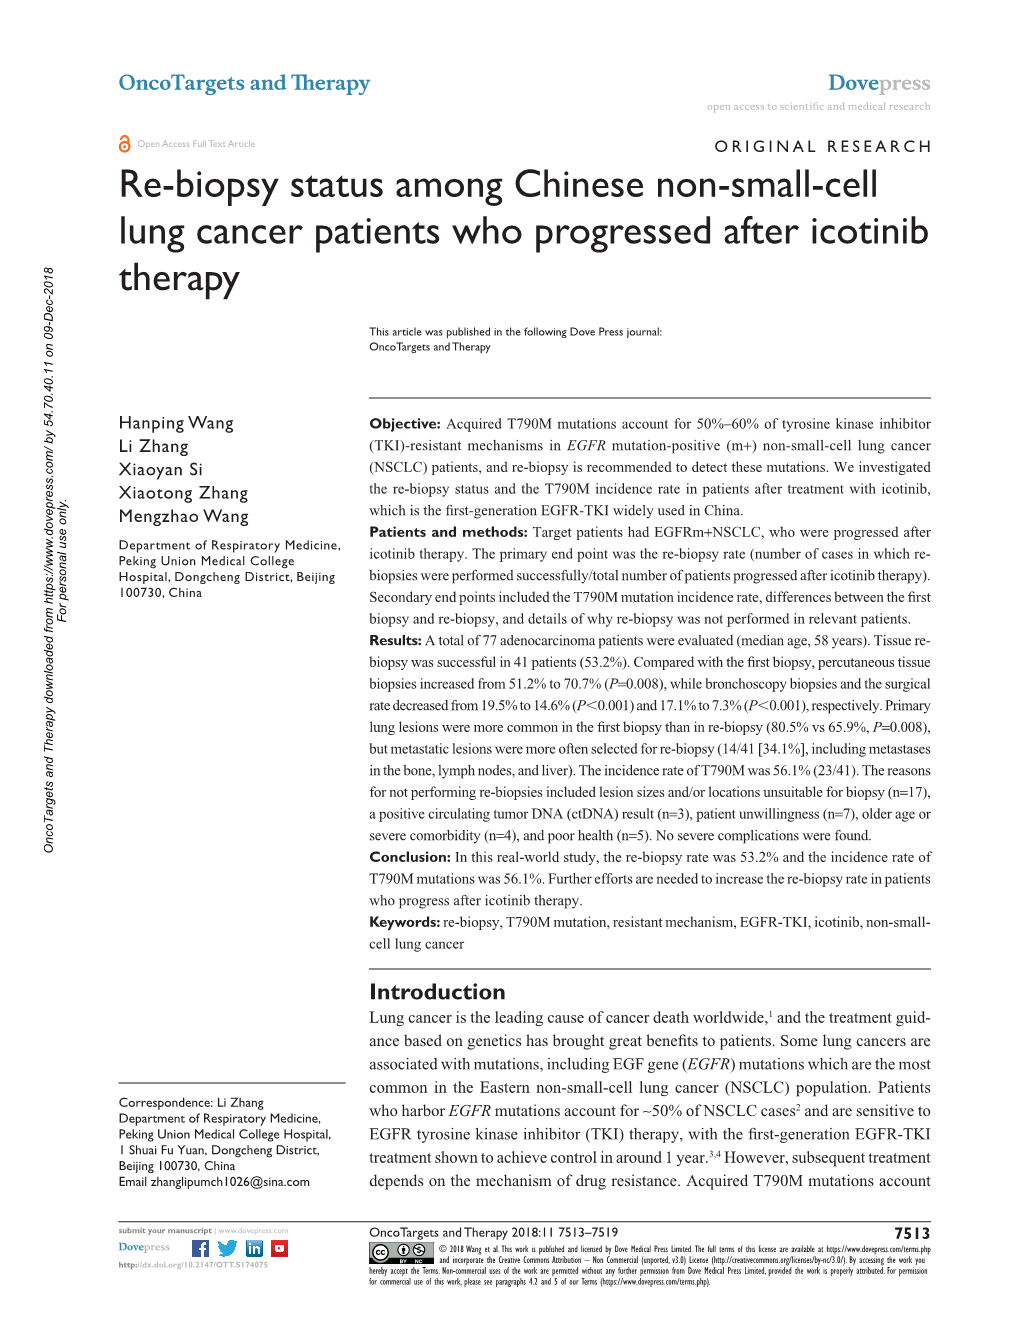 Re-Biopsy Status Among Chinese Non-Small-Cell Lung Cancer Patients Who Progressed After Icotinib Therapy